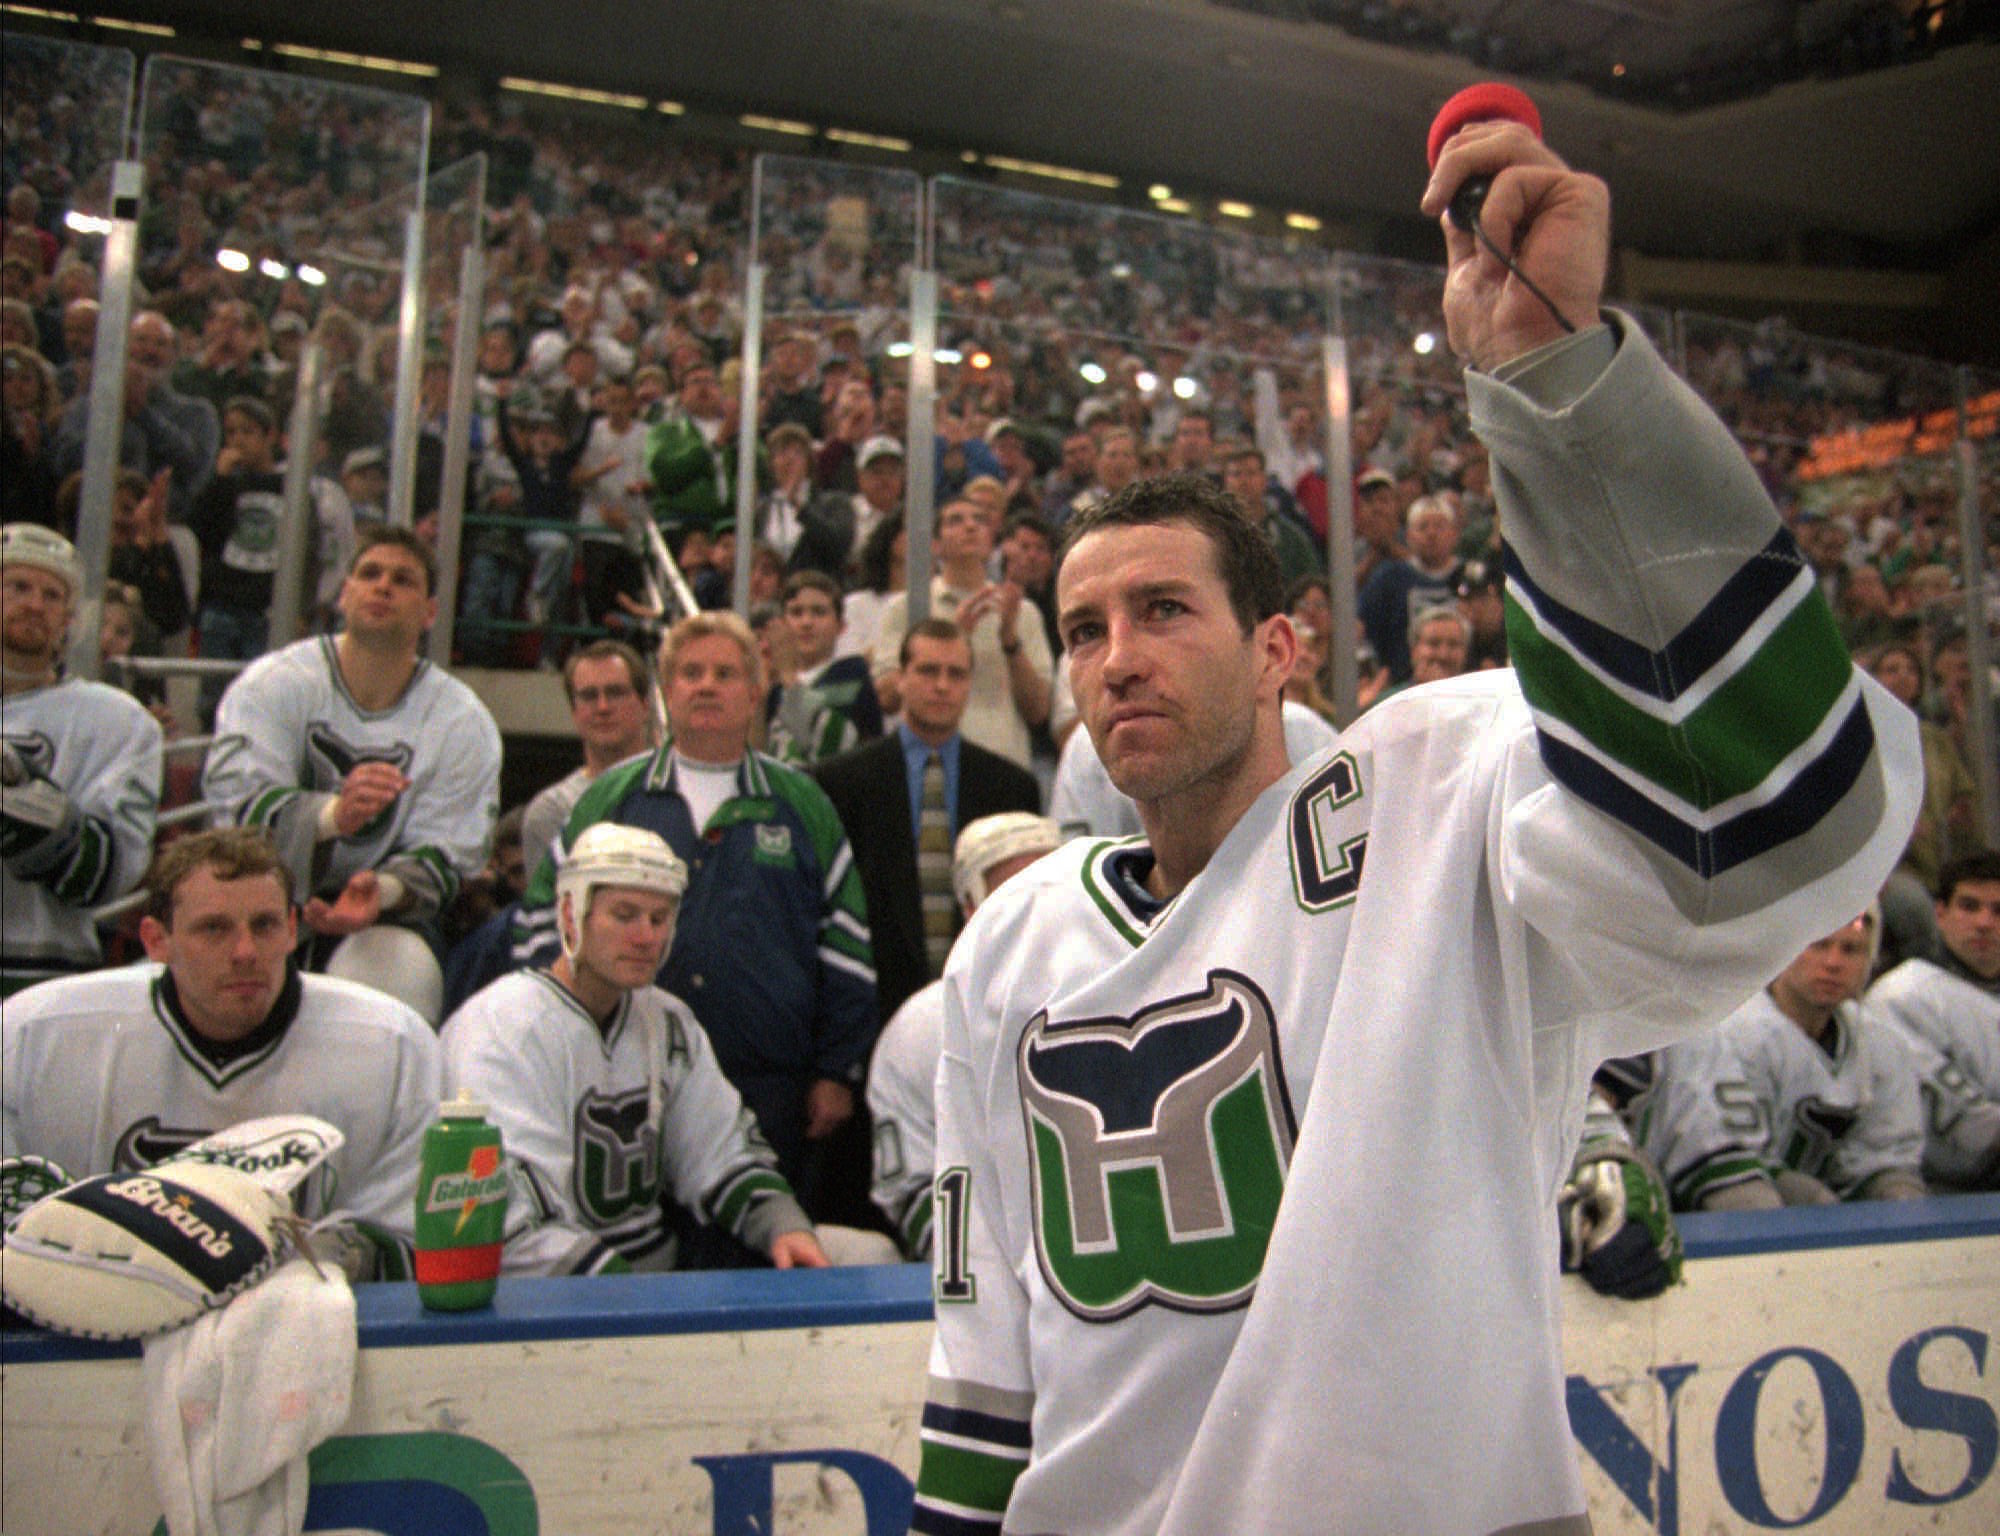 Another reaction to the Carolina Hurricanes wearing the Hartford Whalers  jerseys